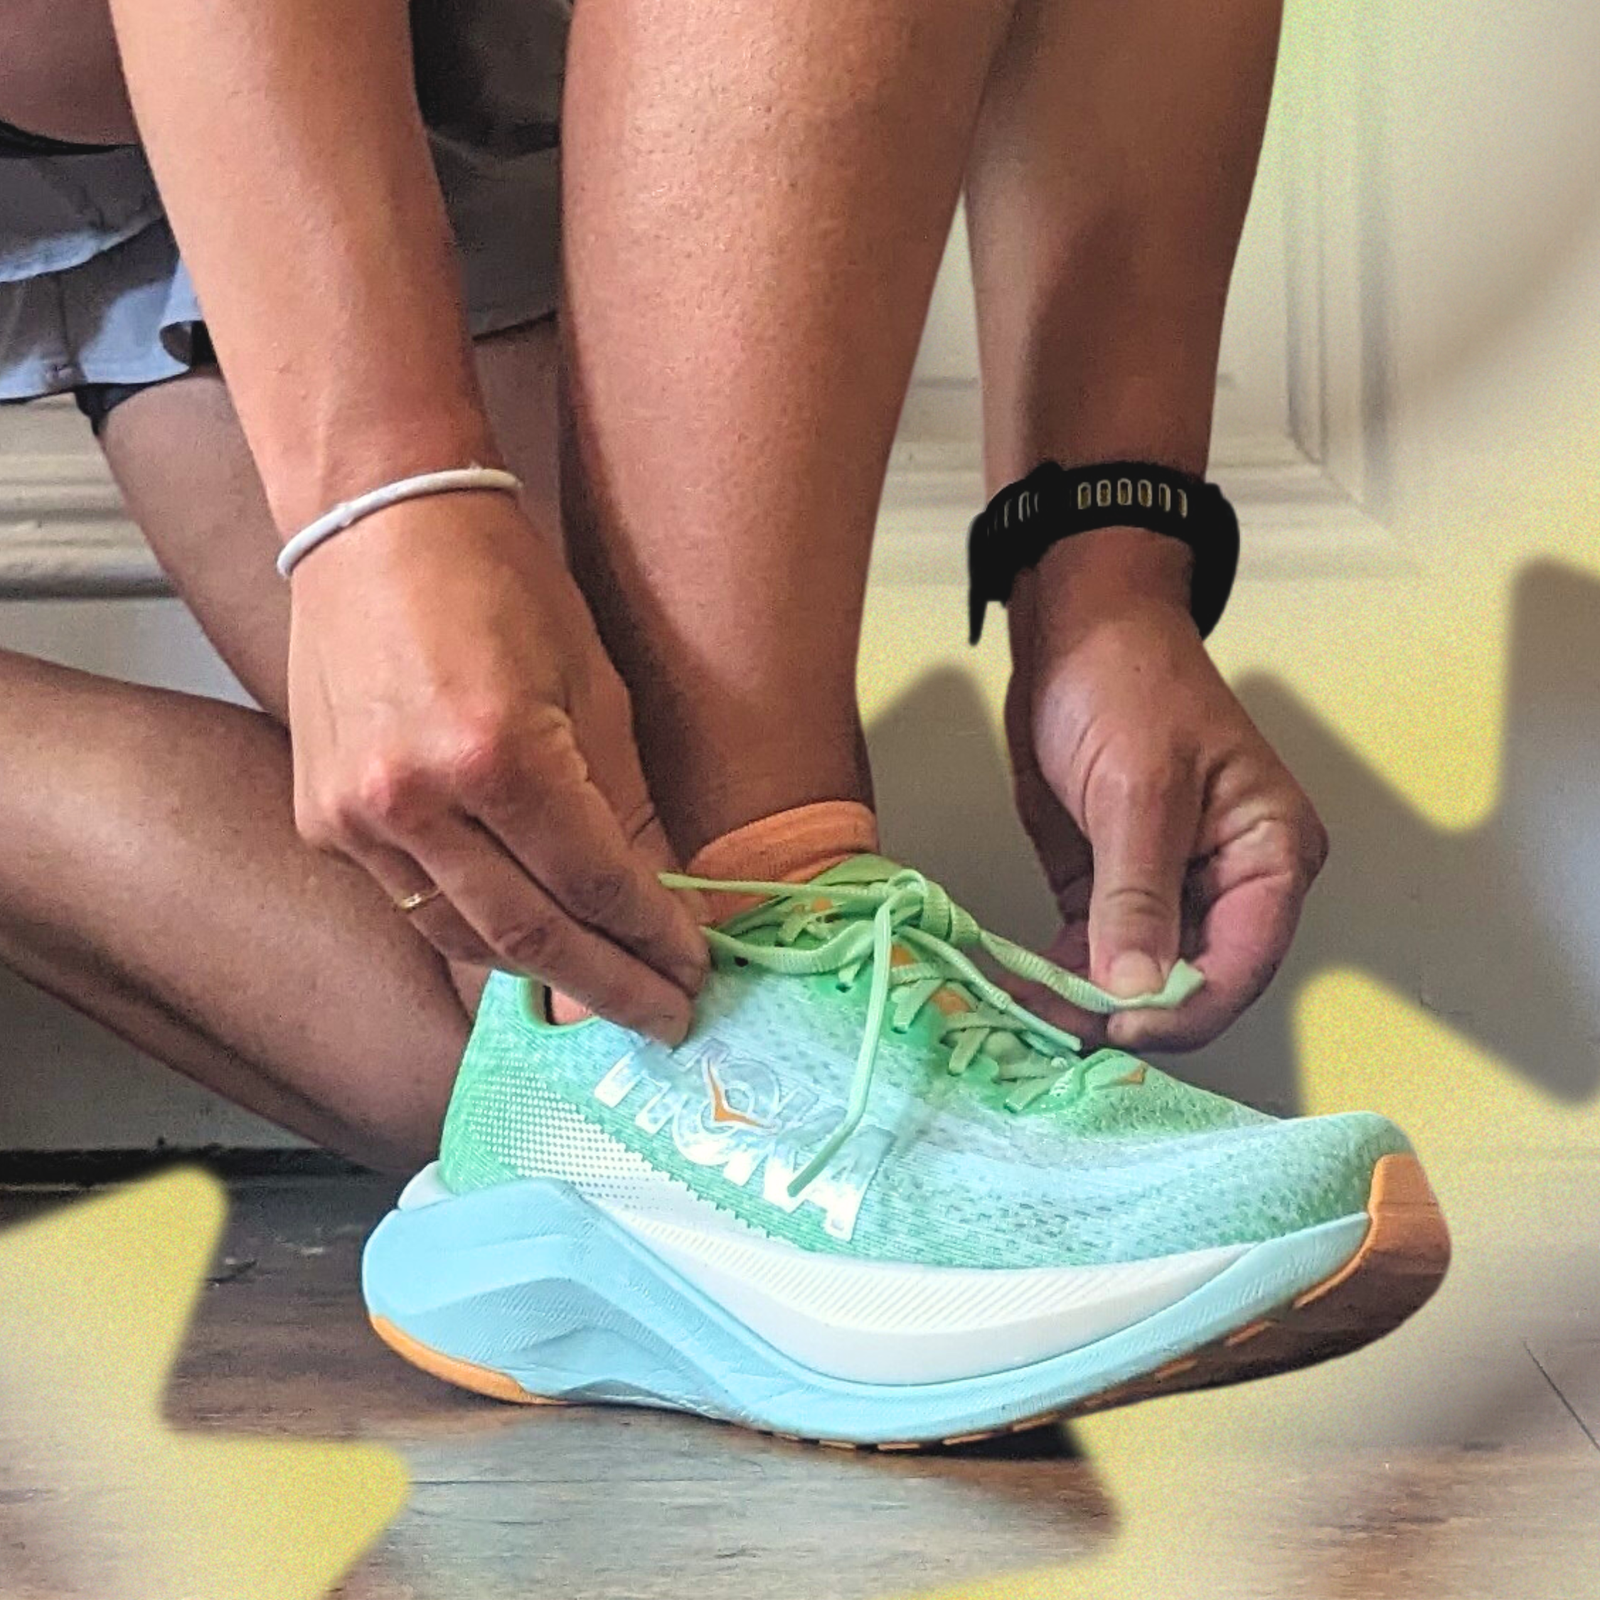 The New Hoka Mach X Is a Daily Running Shoe That I’d Actually Wear on Race Day